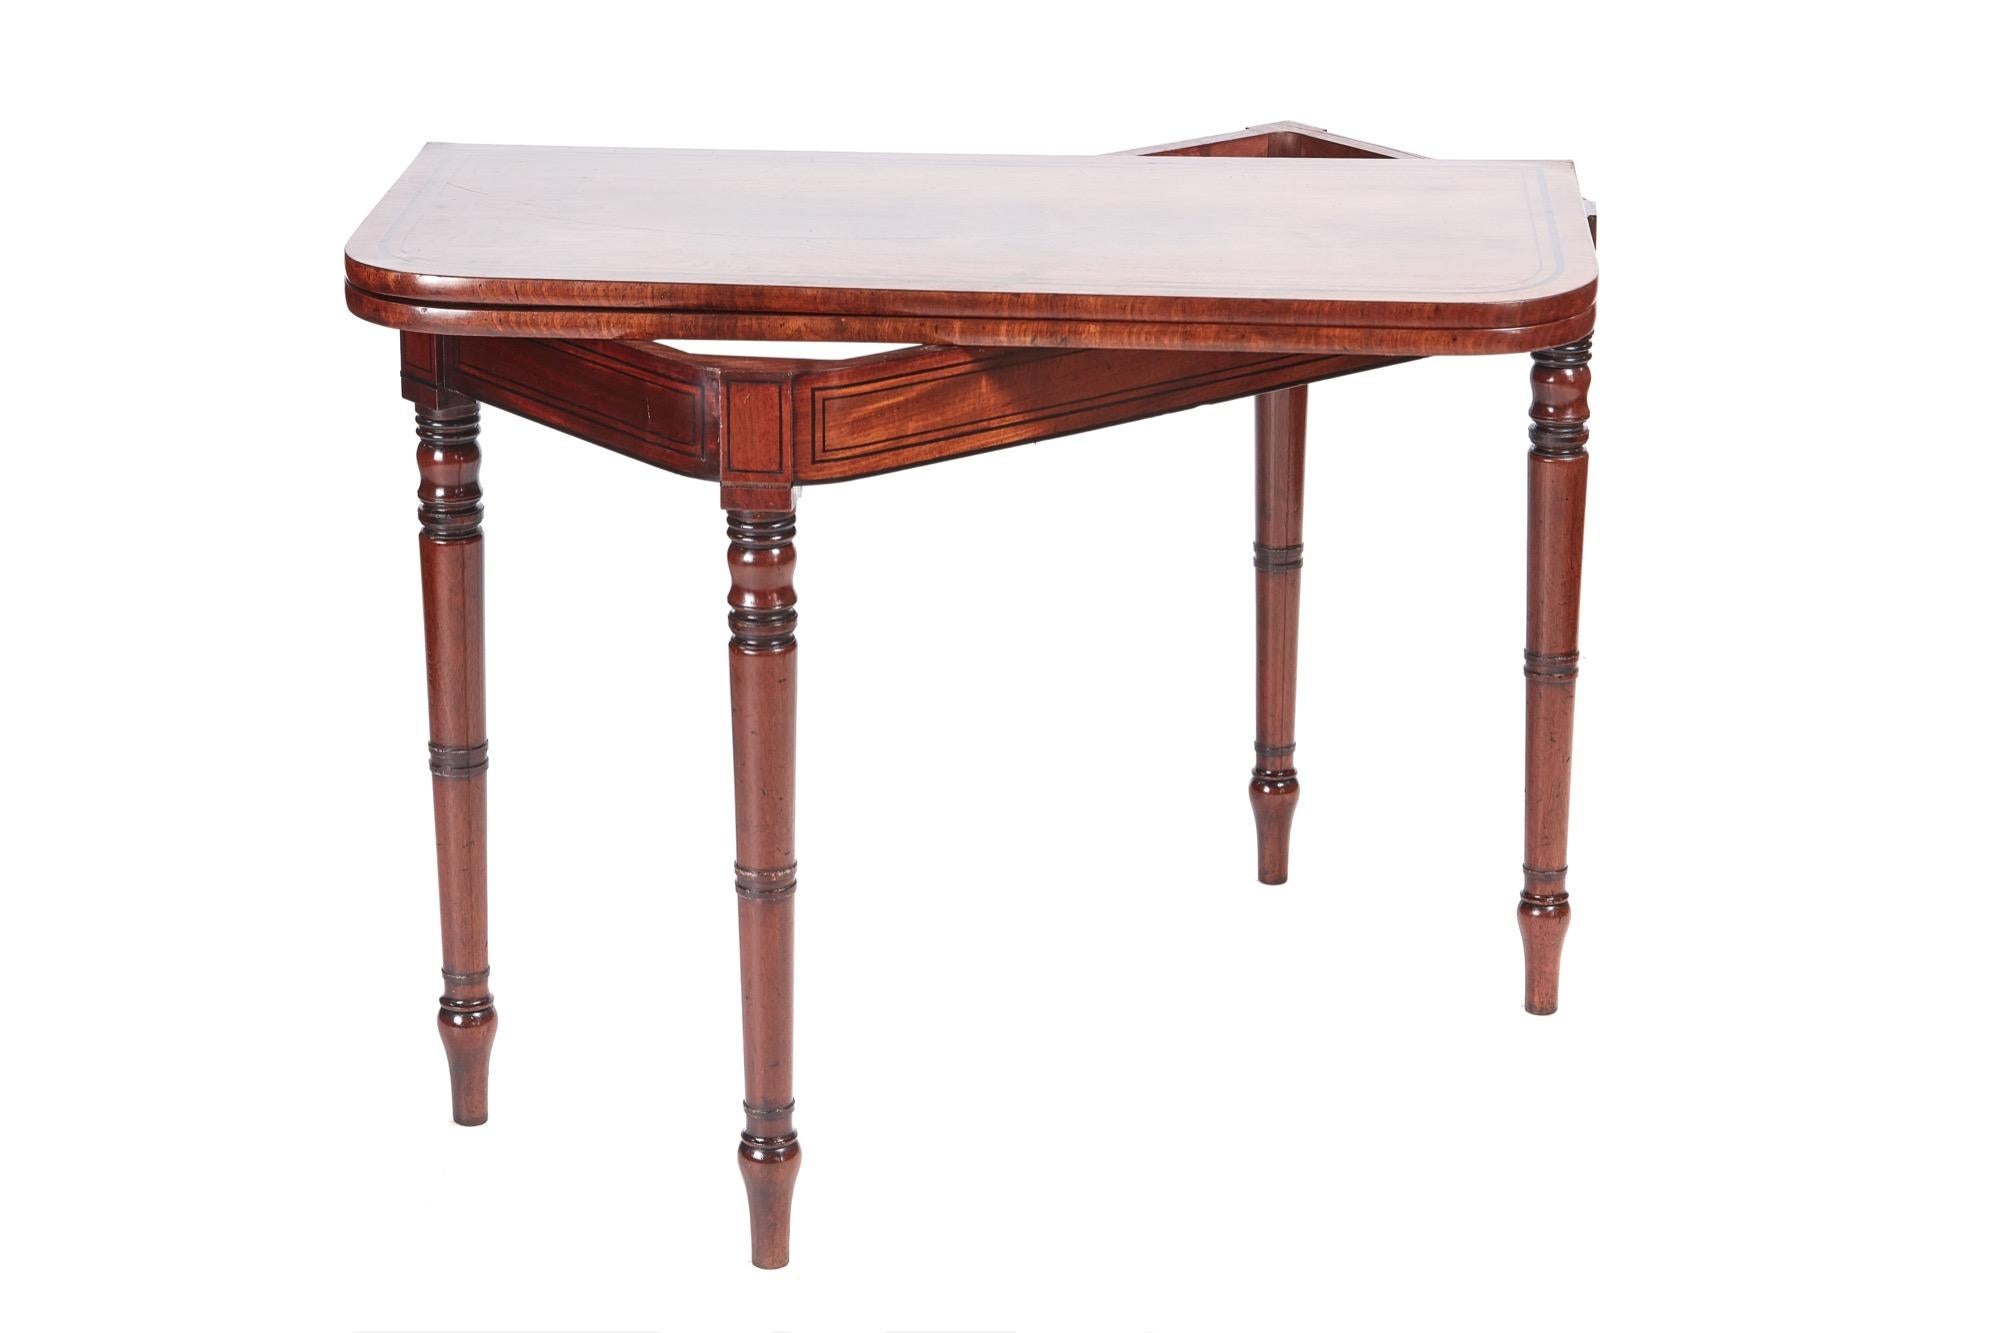 This is a George III antique mahogany card table with the loveliest inlaid mahogany top, original green baize and inlaid frieze. It stands on four elegantly turned legs.

WORLDWIDE SHIPPING

We are able to ship this item internationally.  Please